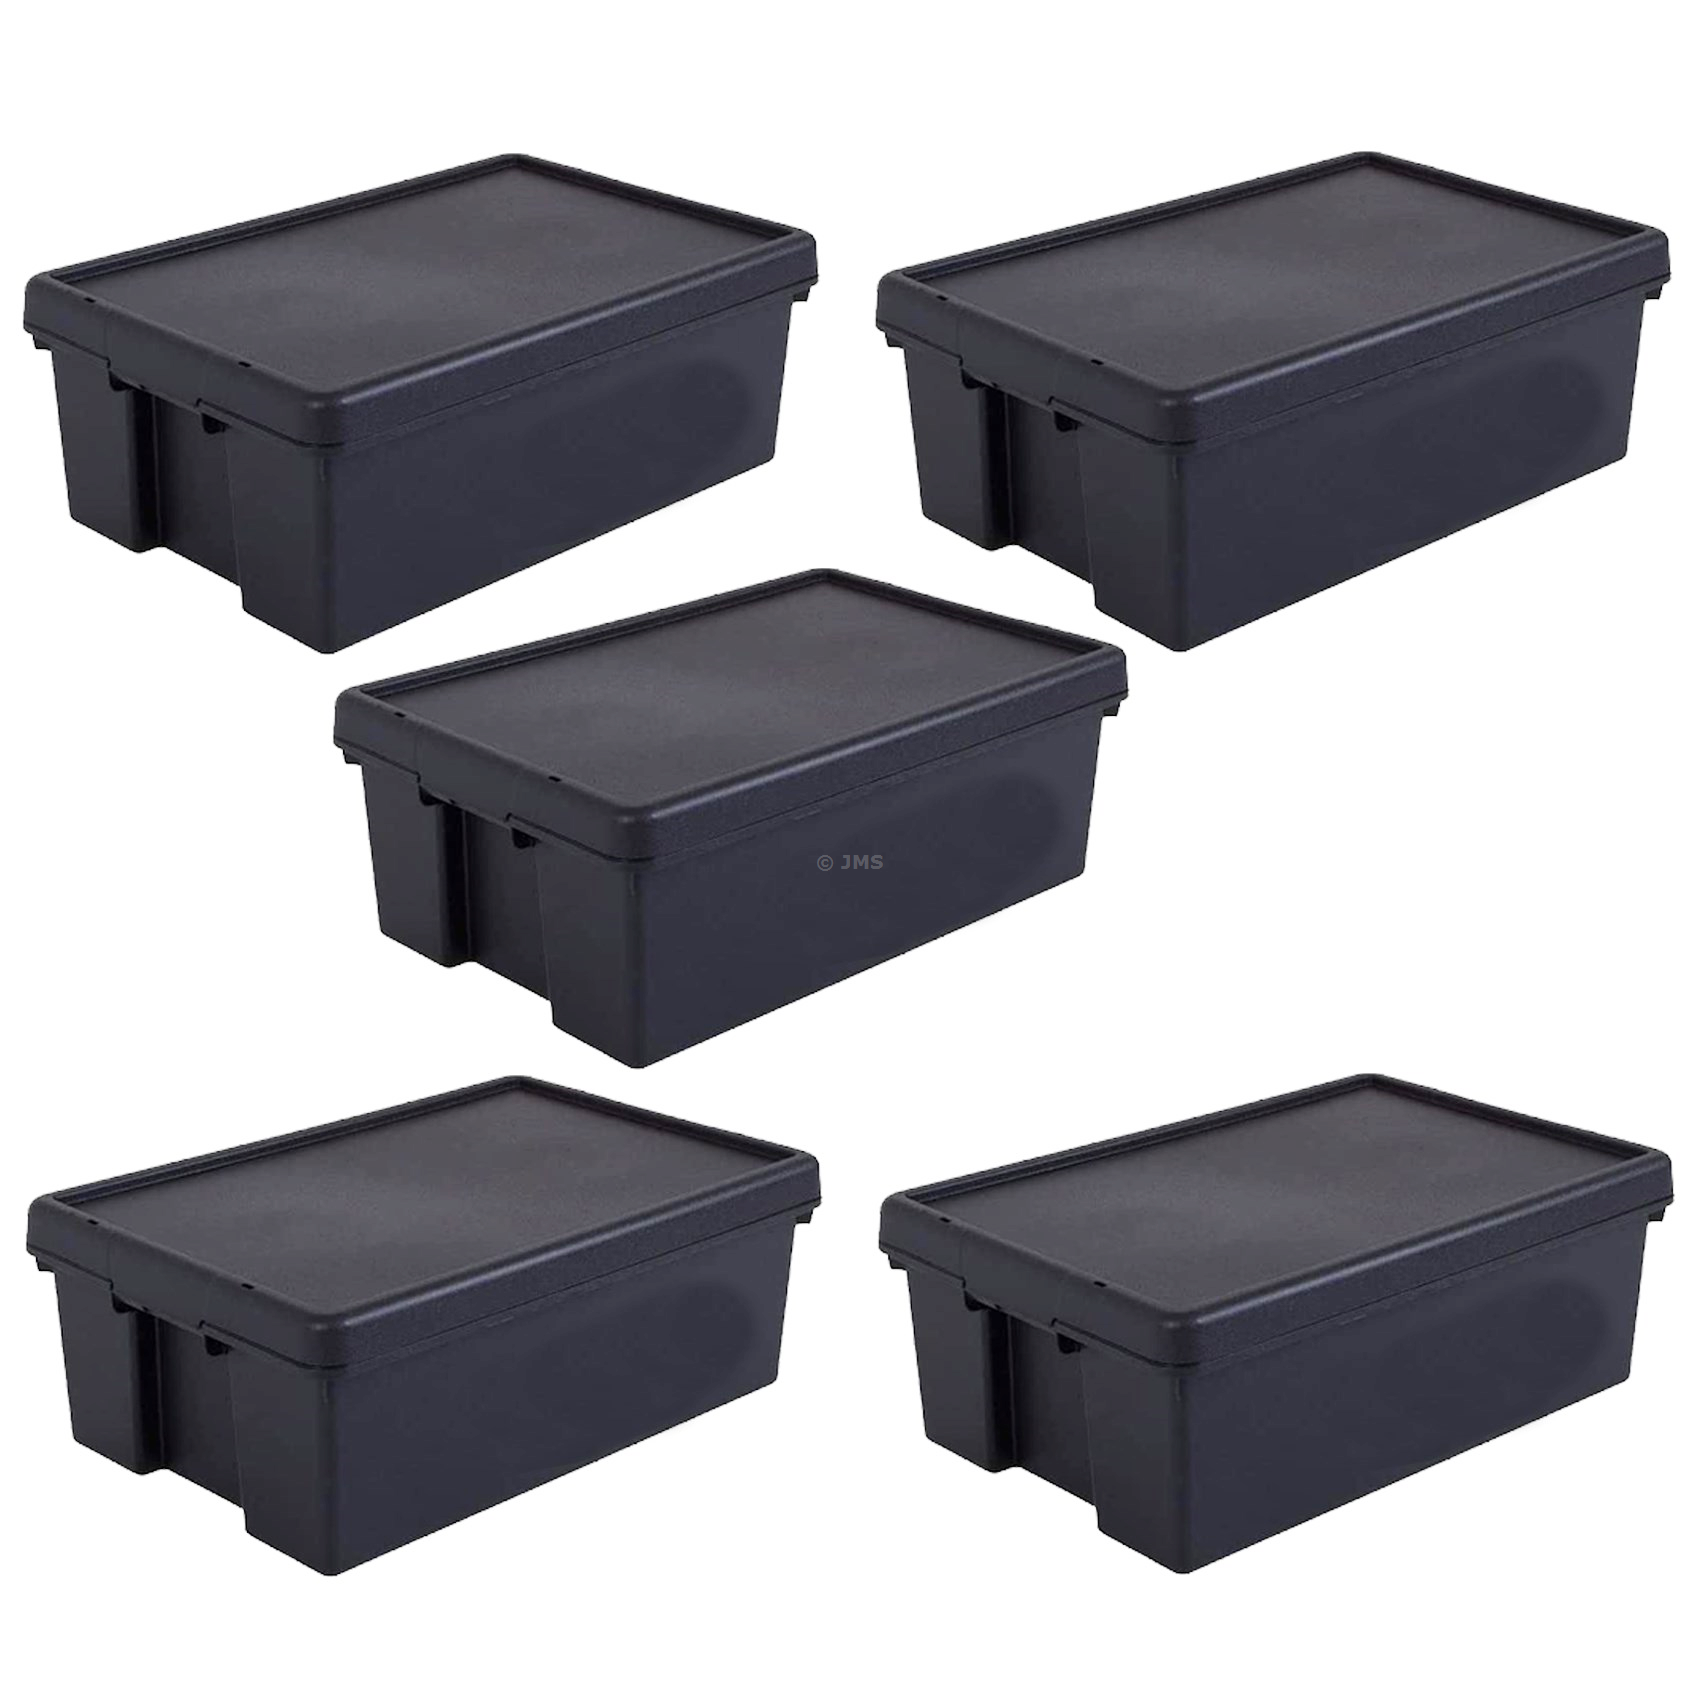 [Set of 5] 36L Black Heavy Duty Storage Box with Lid Recycled Plastic Stackable Nestable Containers Home Office Garage